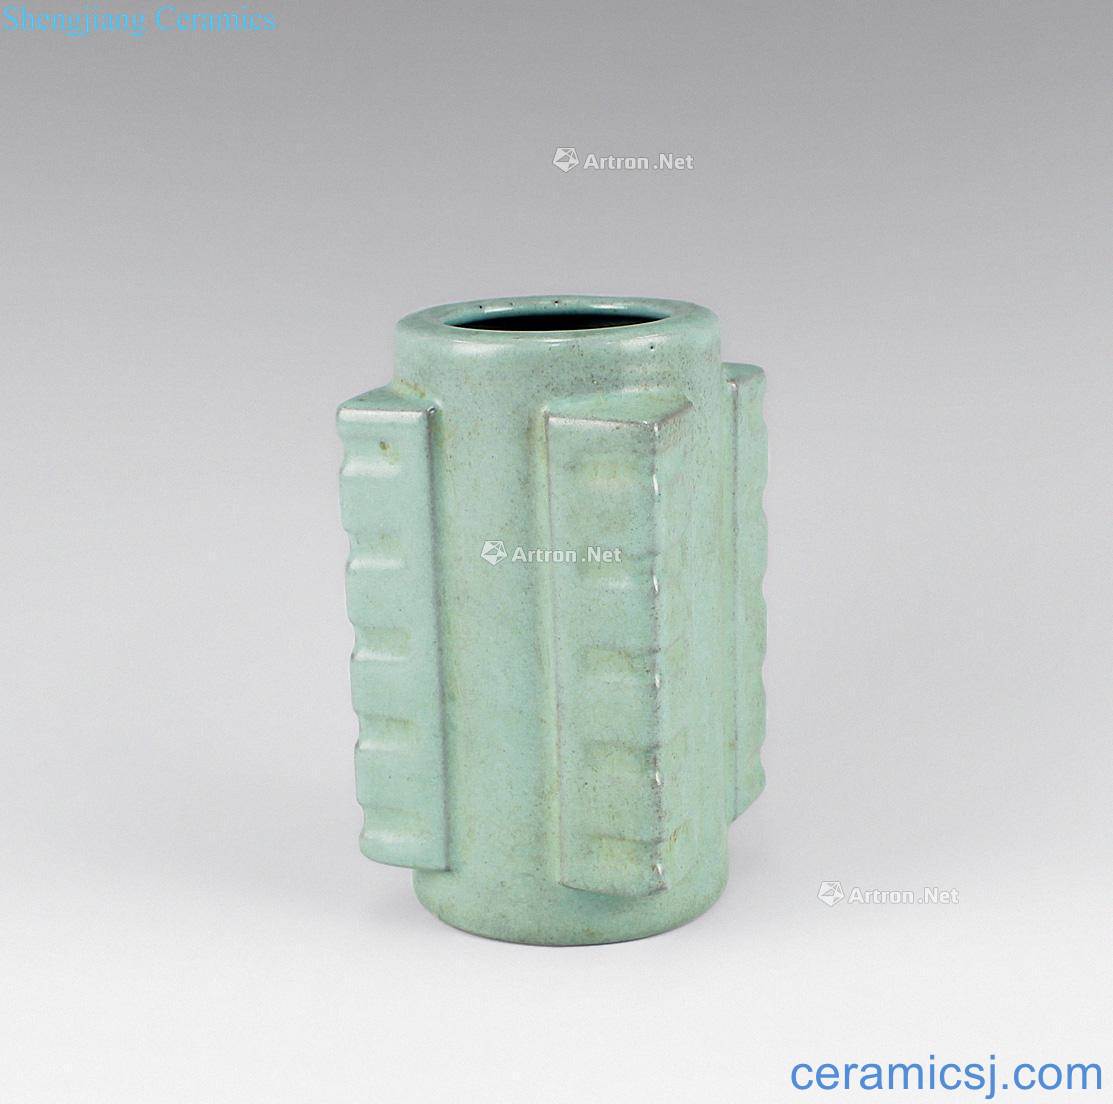 The song dynasty Your kiln cong type bottle